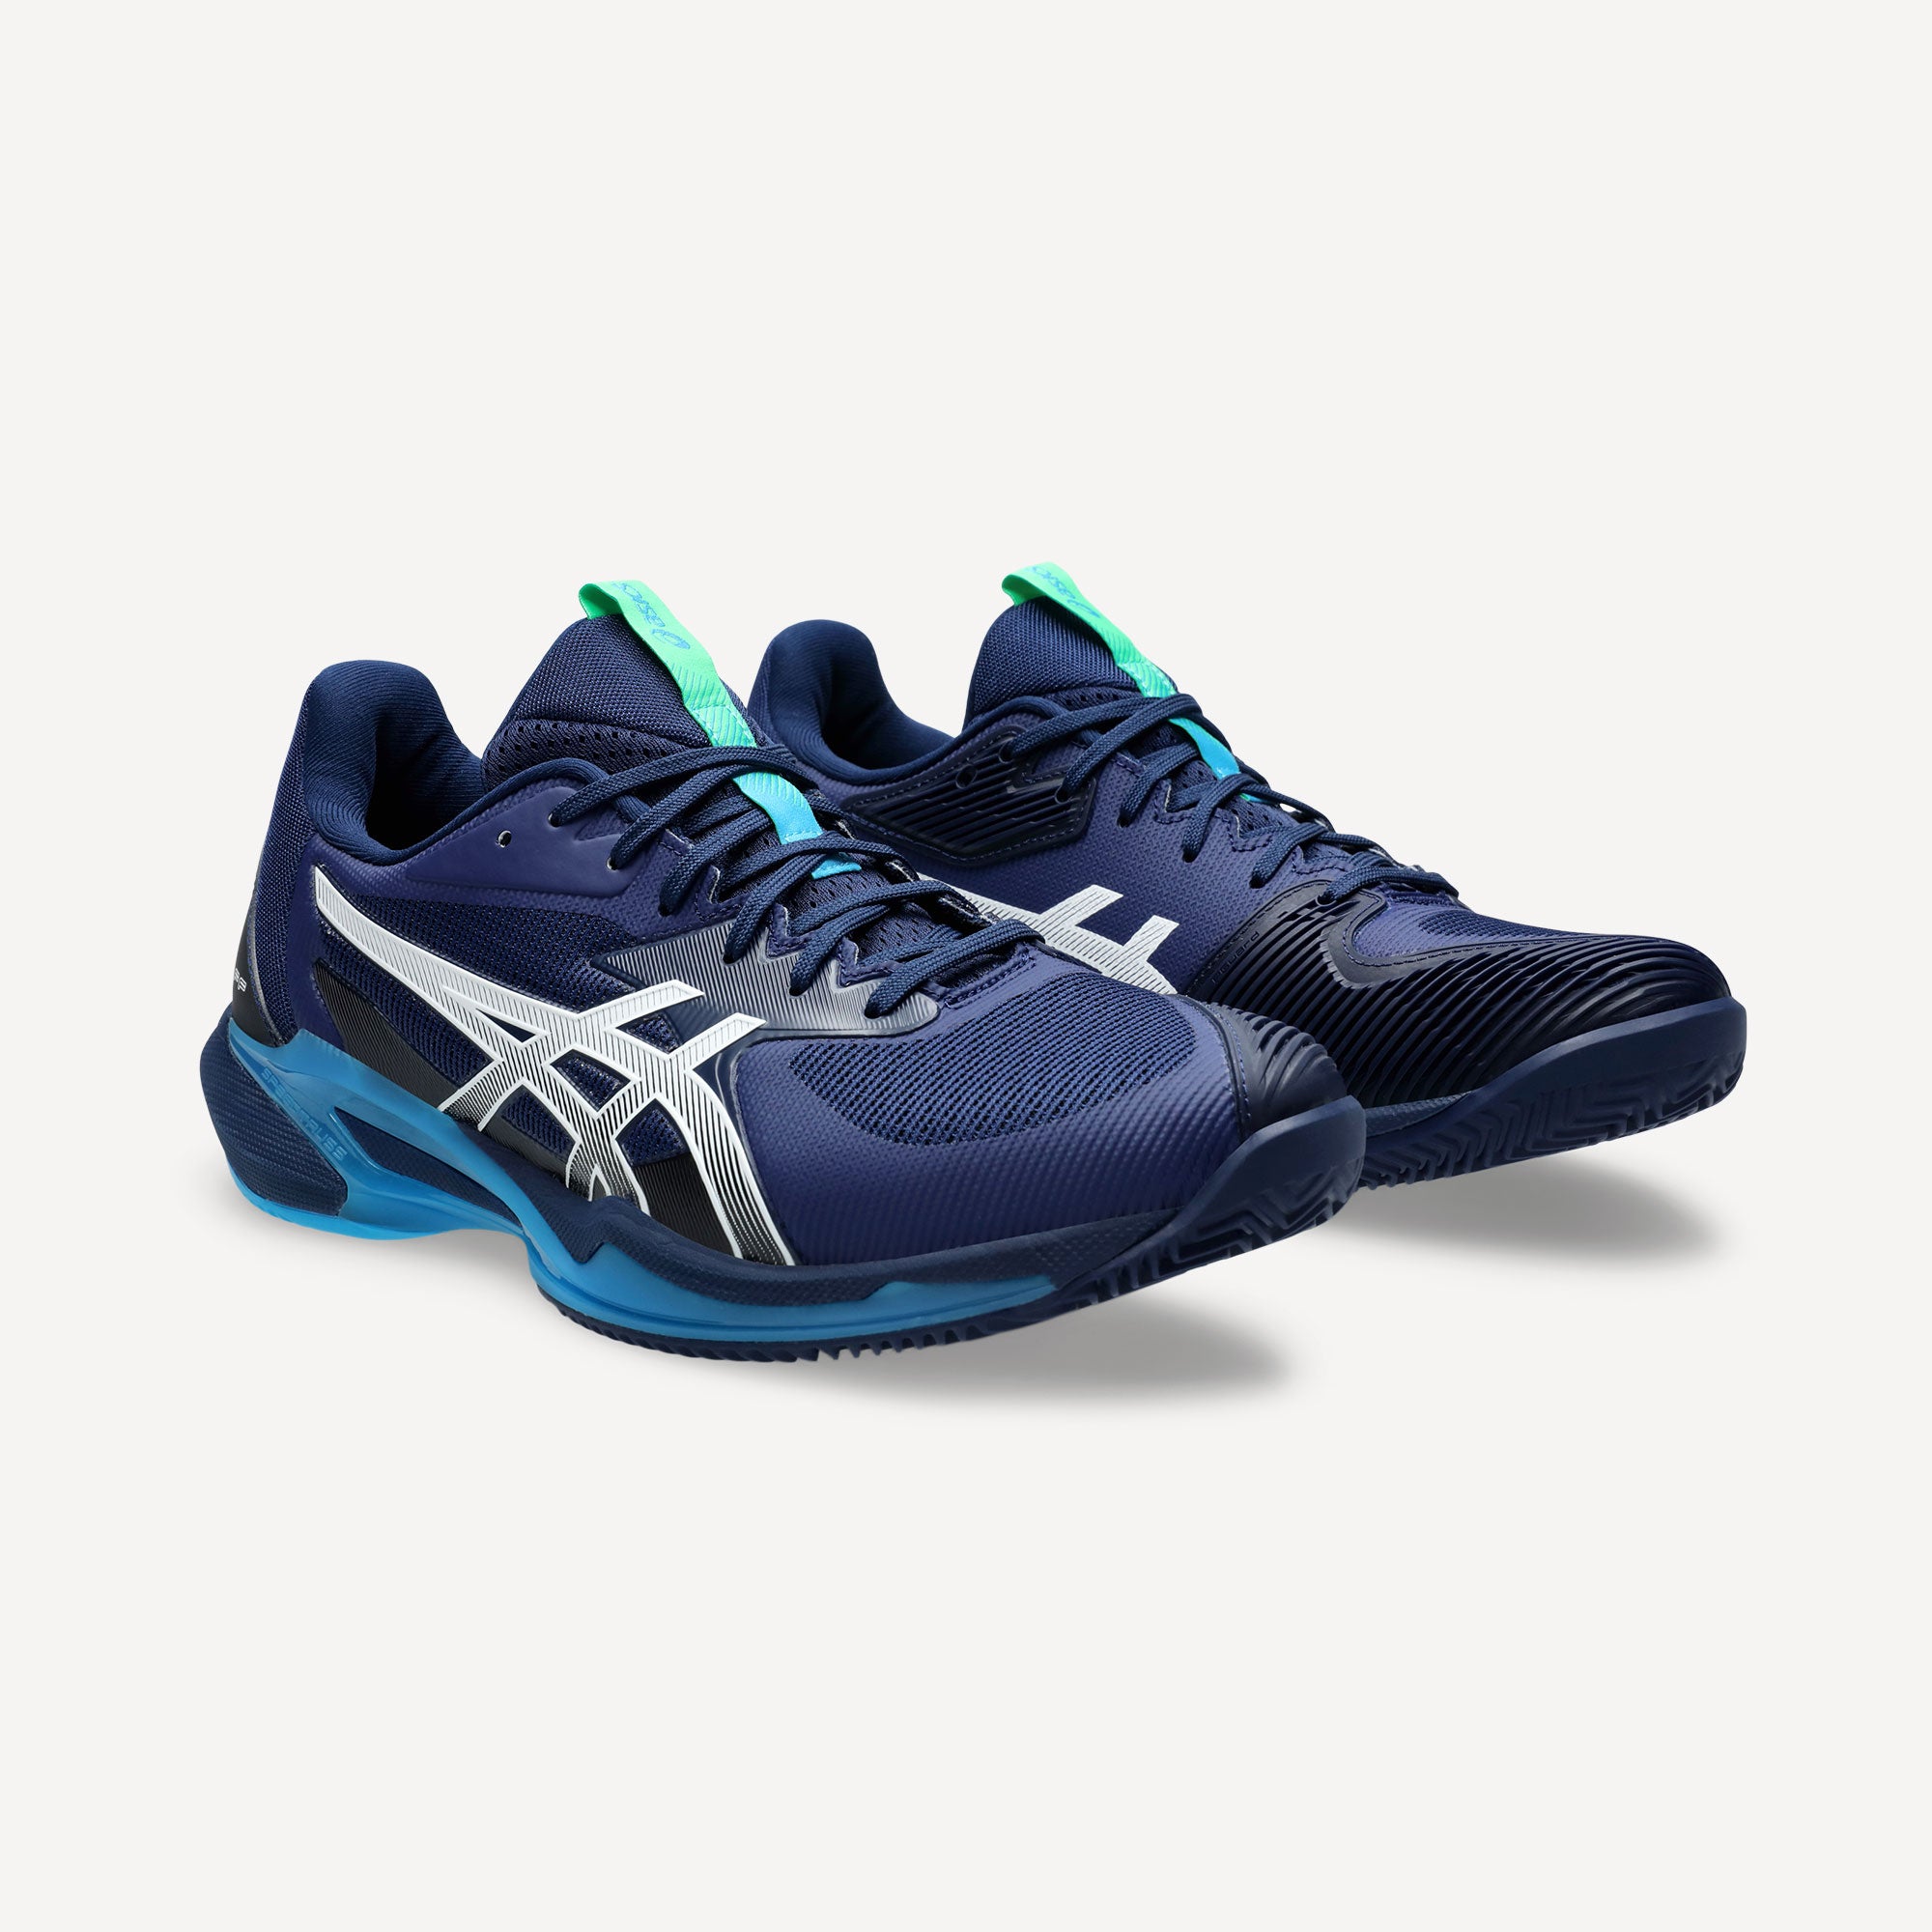 ASICS Solution Speed FF 3 Men's Clay Court Tennis Shoes - Blue (4)